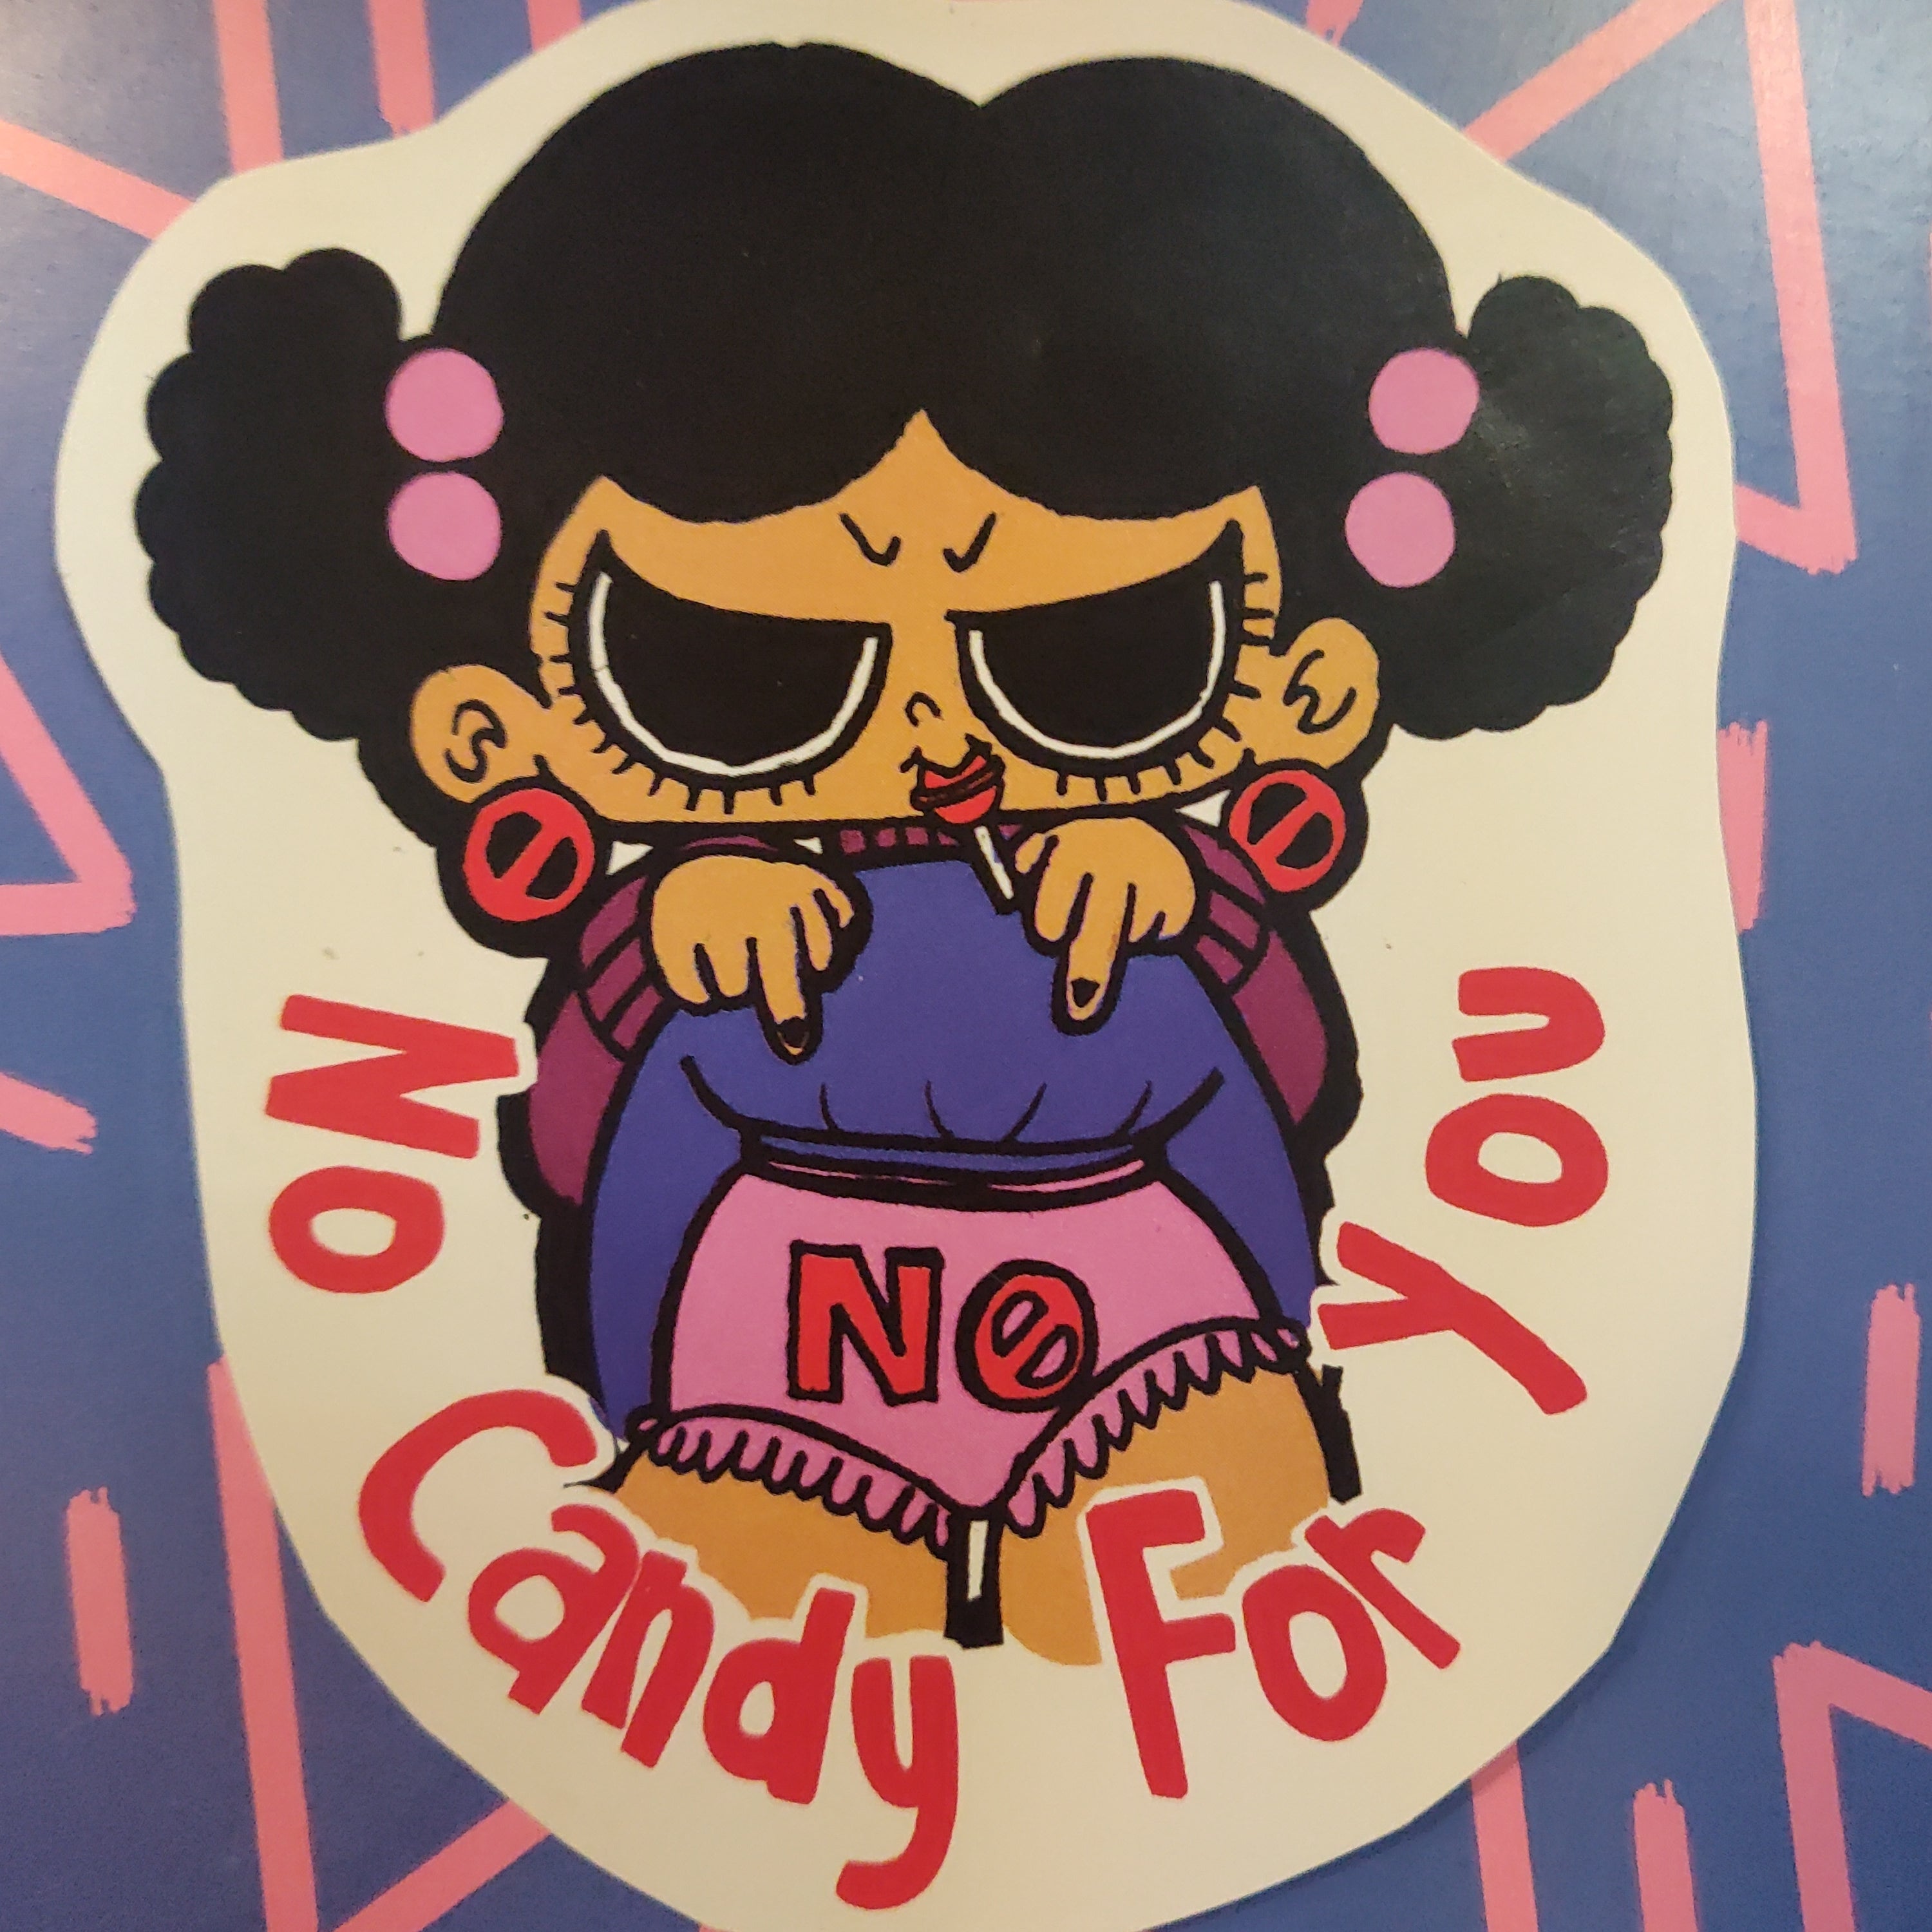 No Candy For You STICKER by Riot NJ